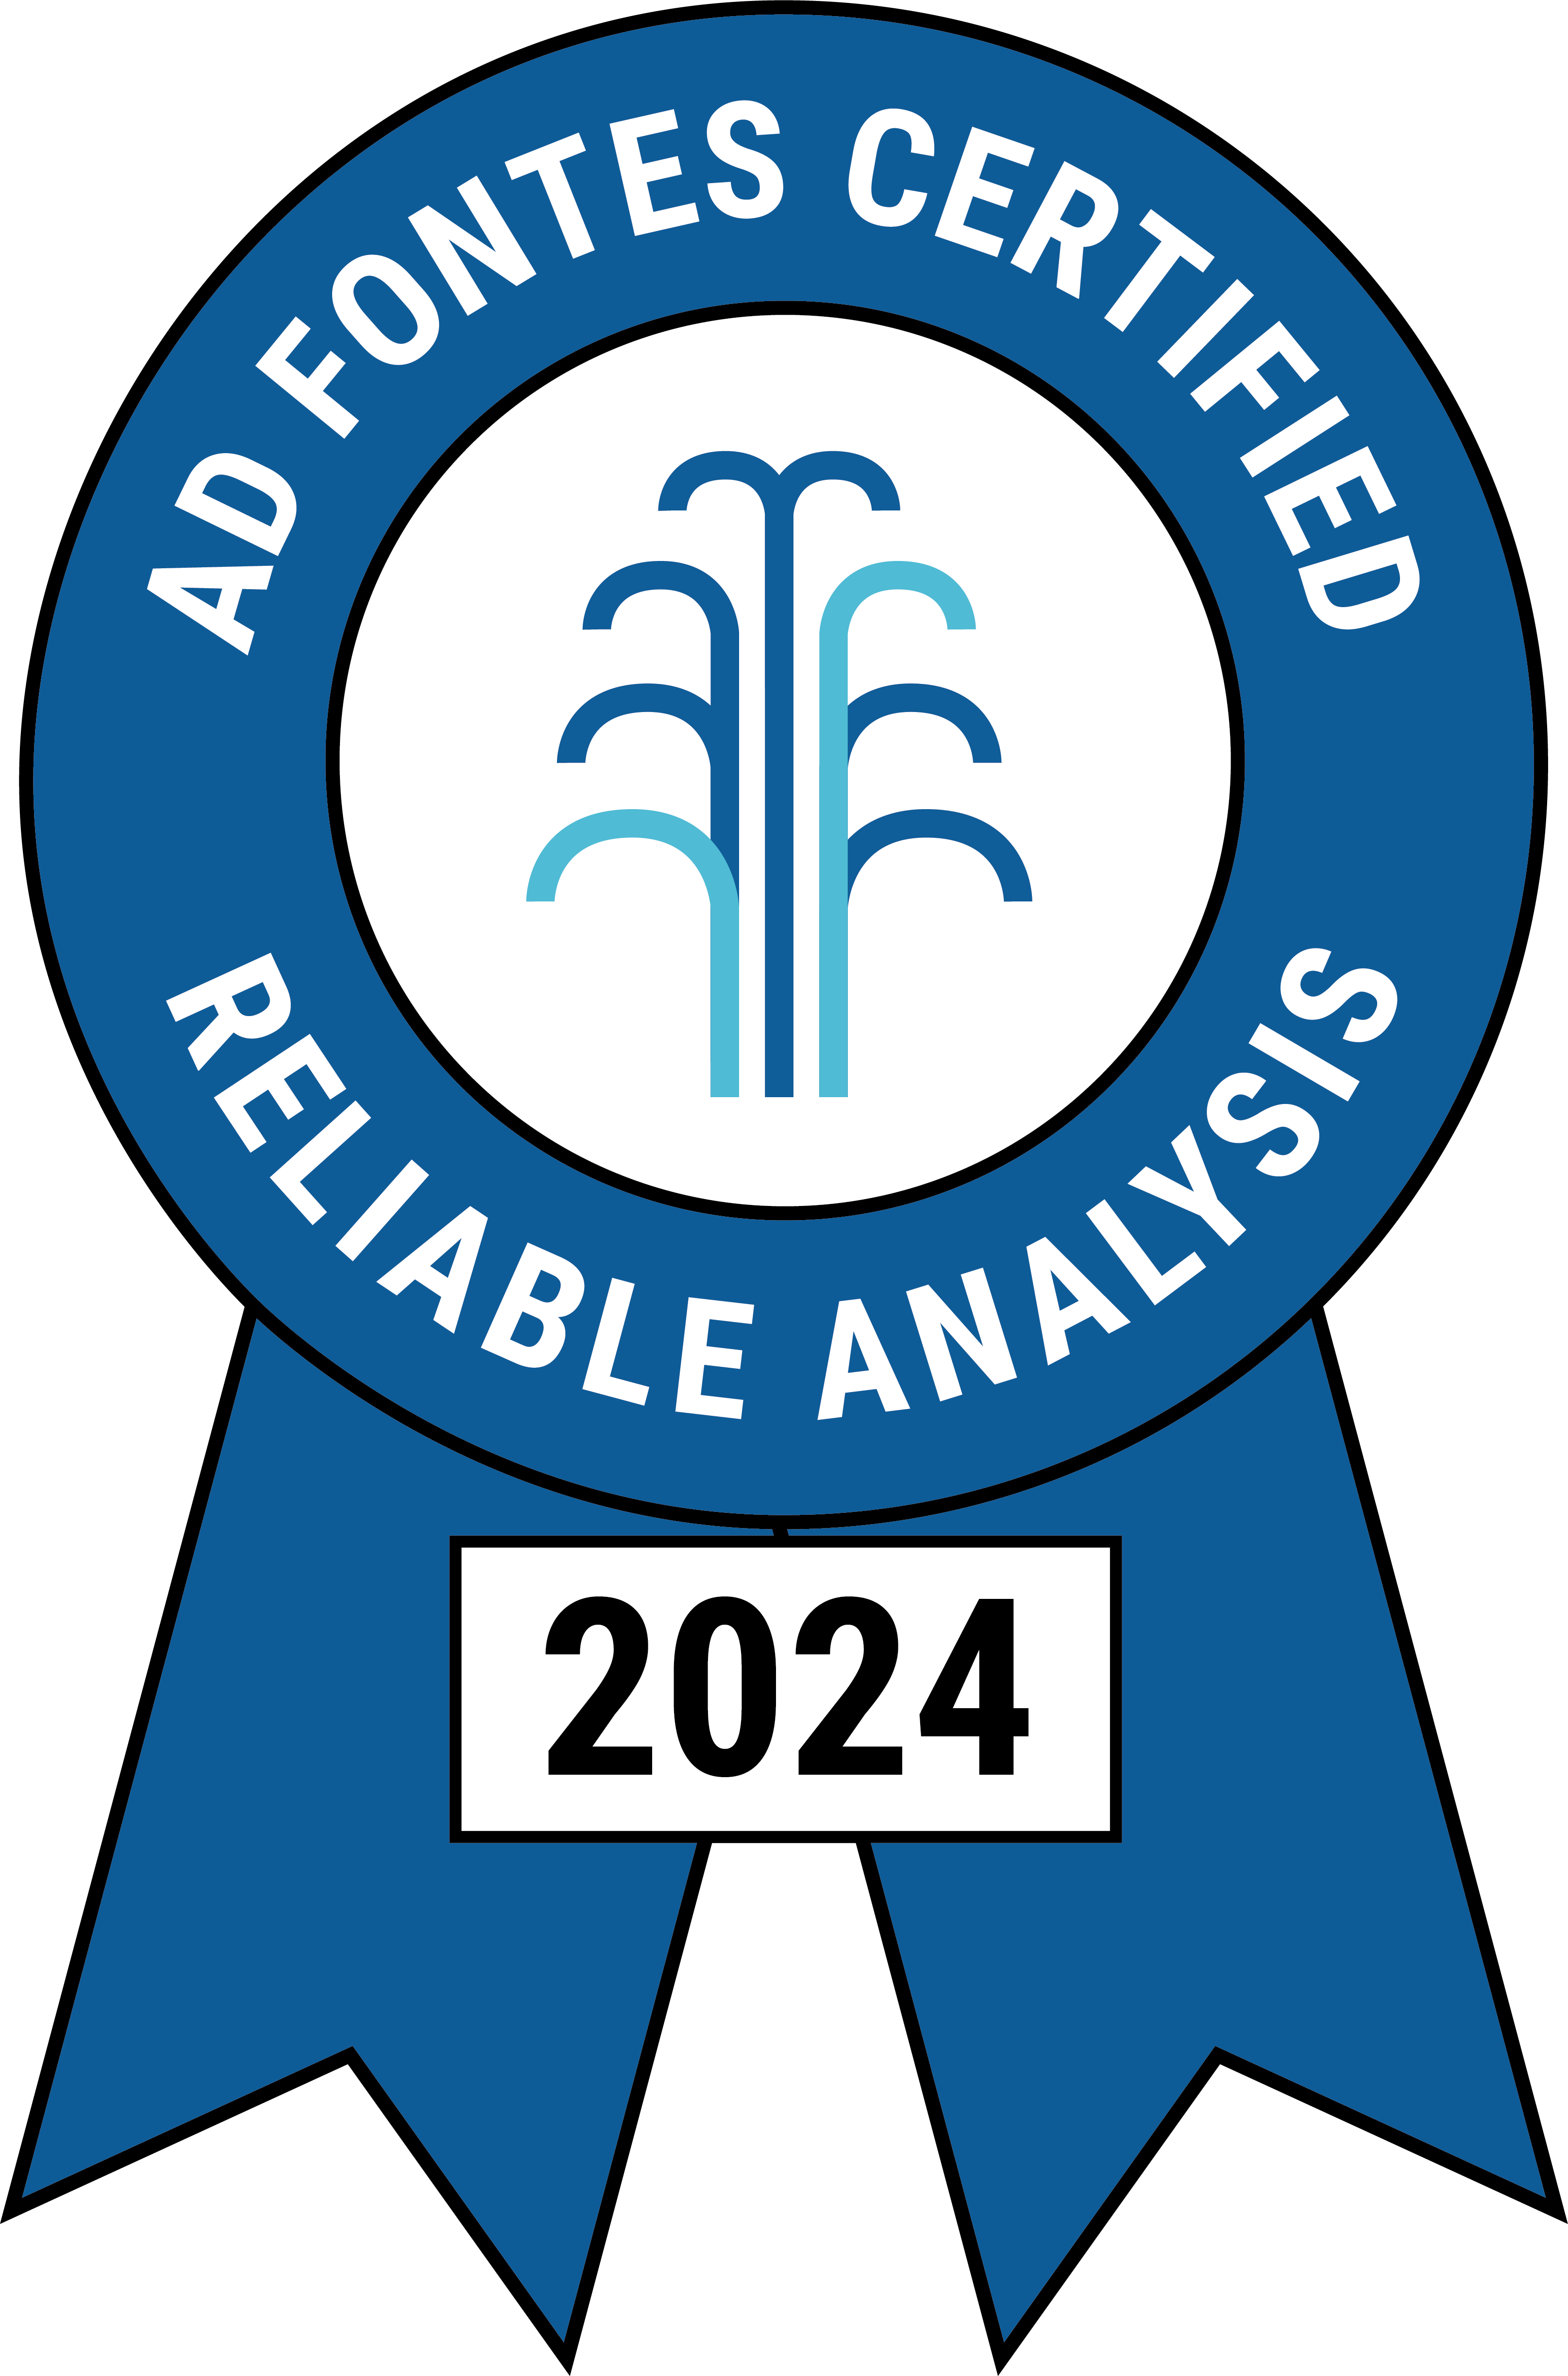 Ad Fontes Certified Reliable Analysis badge